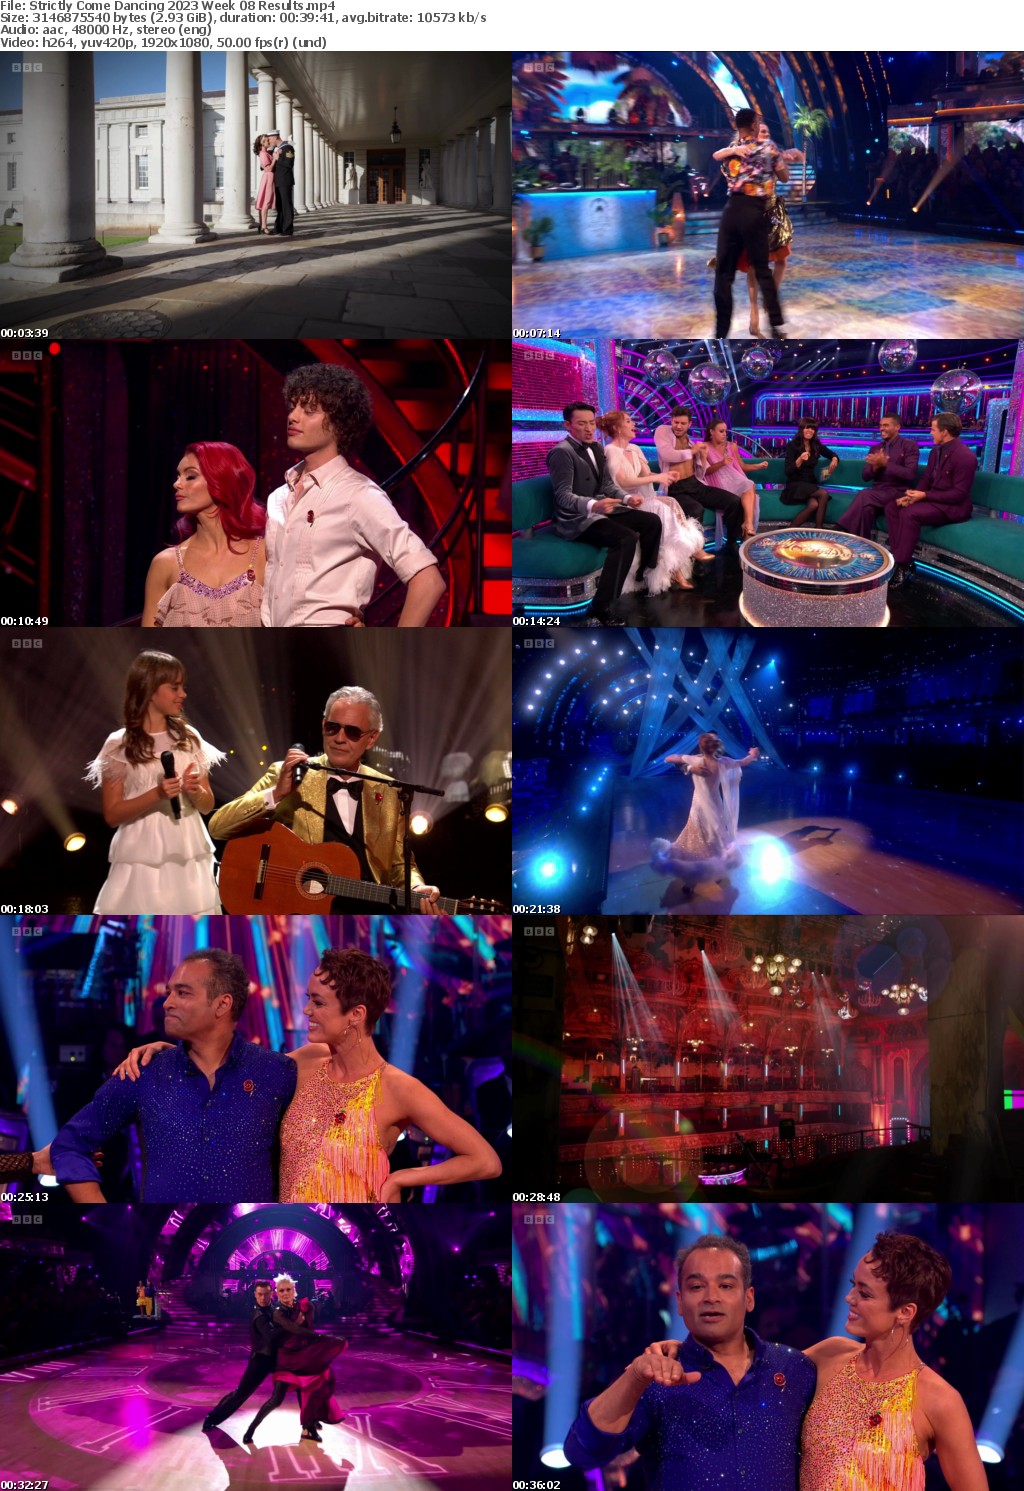 Strictly Come Dancing 2023 Week 08 Results (1080p, 50fps, soft Eng subs)